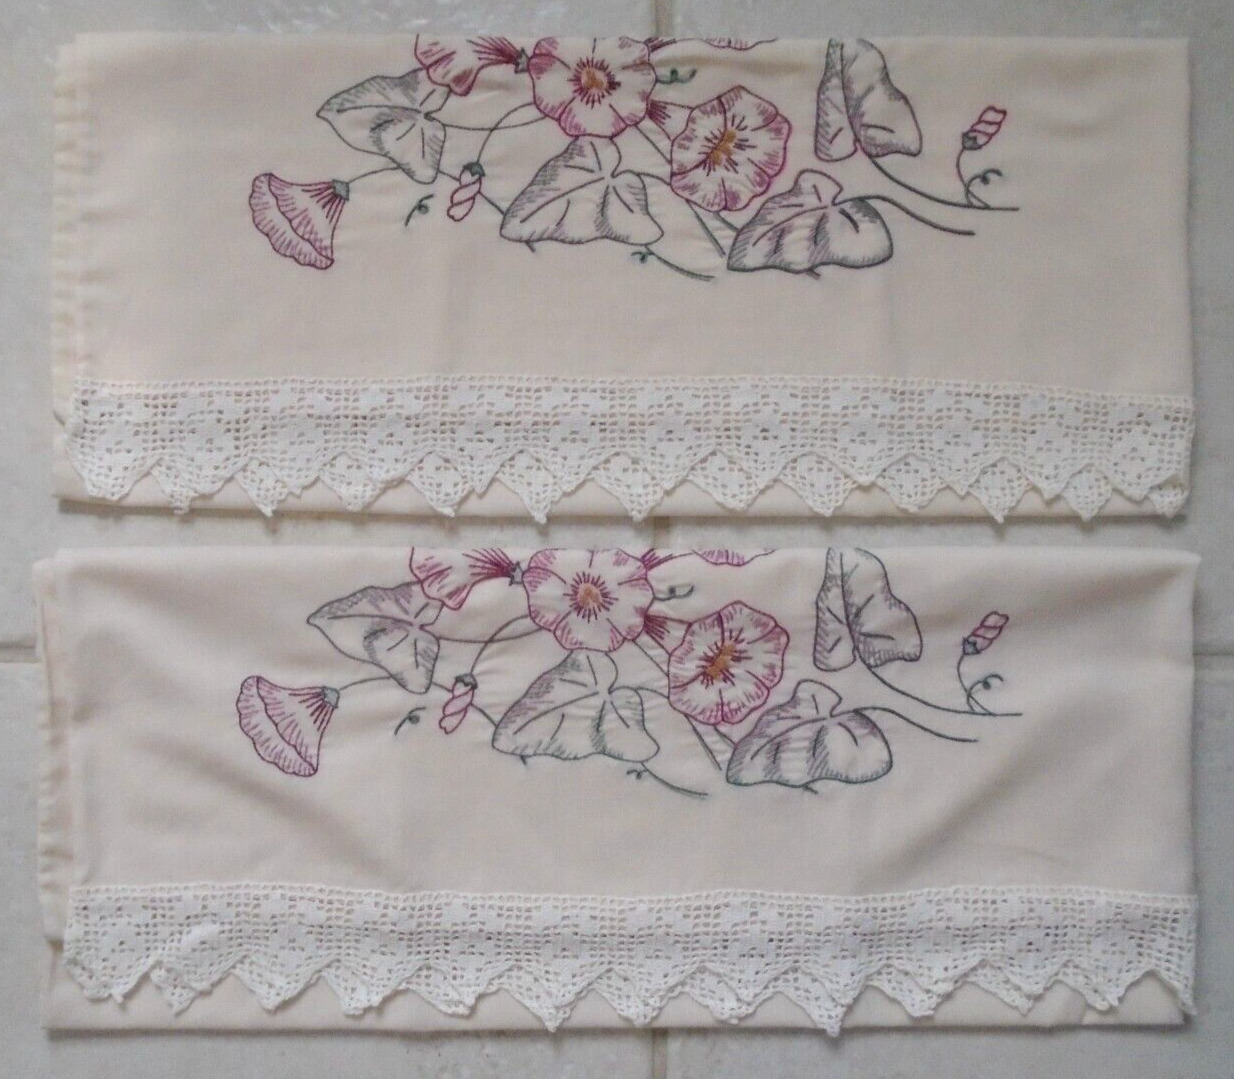 LOVELY UNUSED BEIGE PILLOWCASES MORNING GLORIES LACE TRIM BURGUNDY GREEN FLORAL